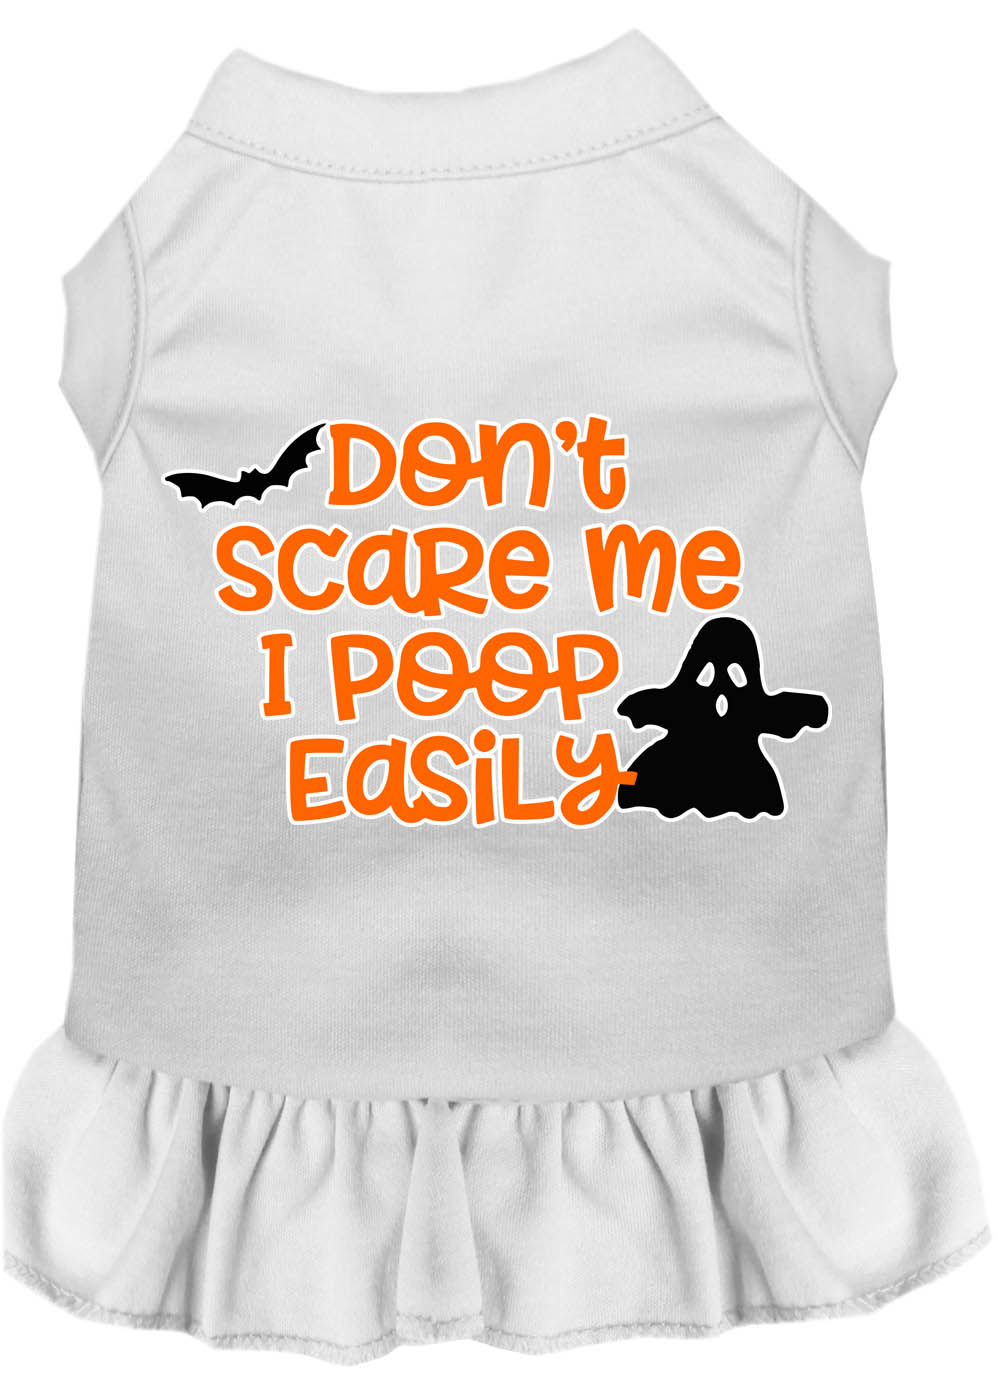 Don't Scare Me, Poops Easily Screen Print Dog Dress White Lg